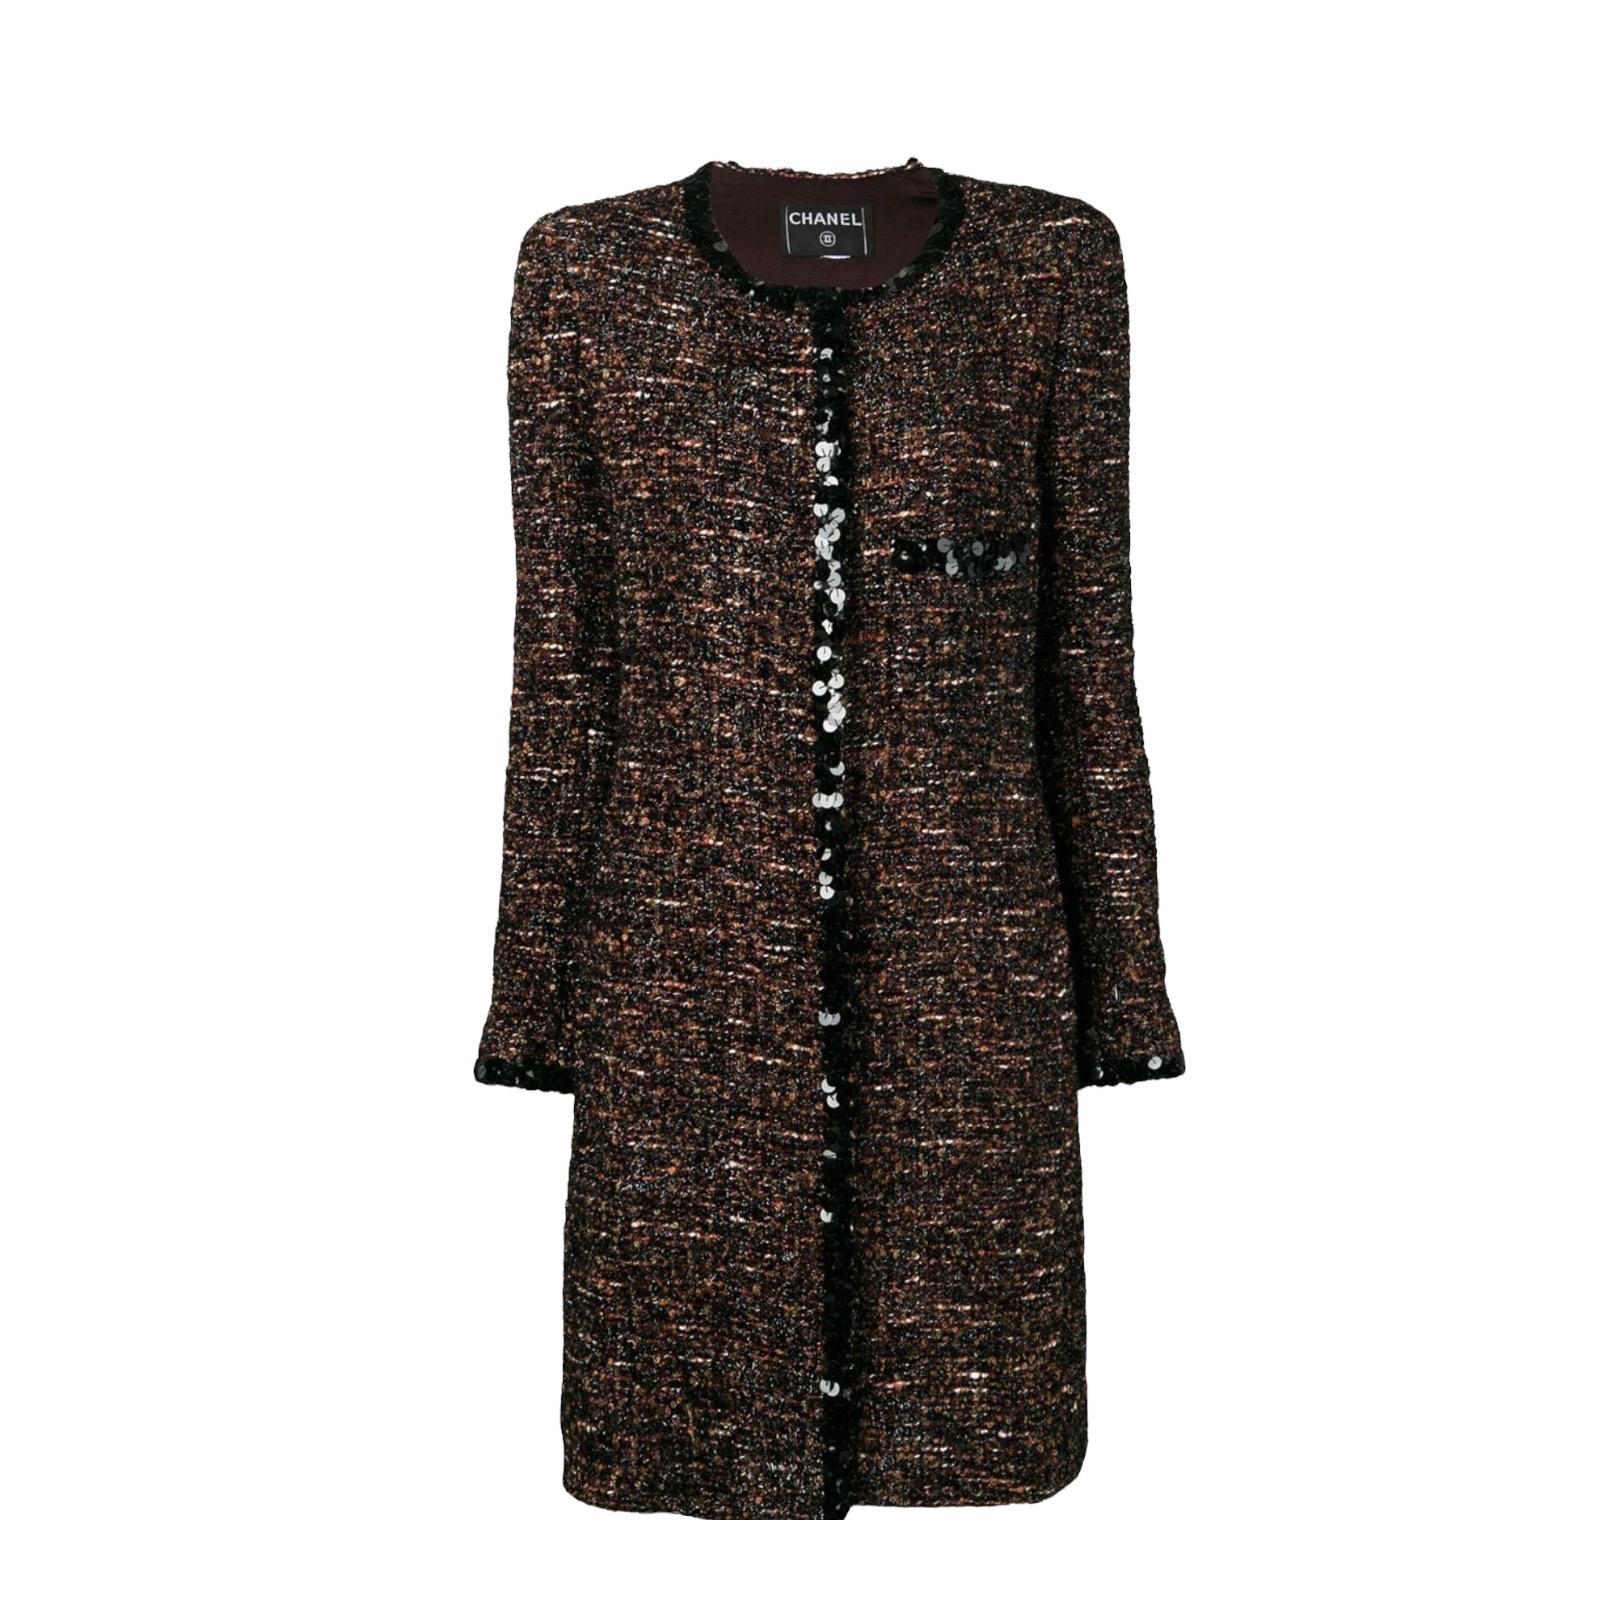 Beautiful CHANEL fantasy tweed coat
A true CHANEL signature item that will last you for many years
Closes in front with concealed 